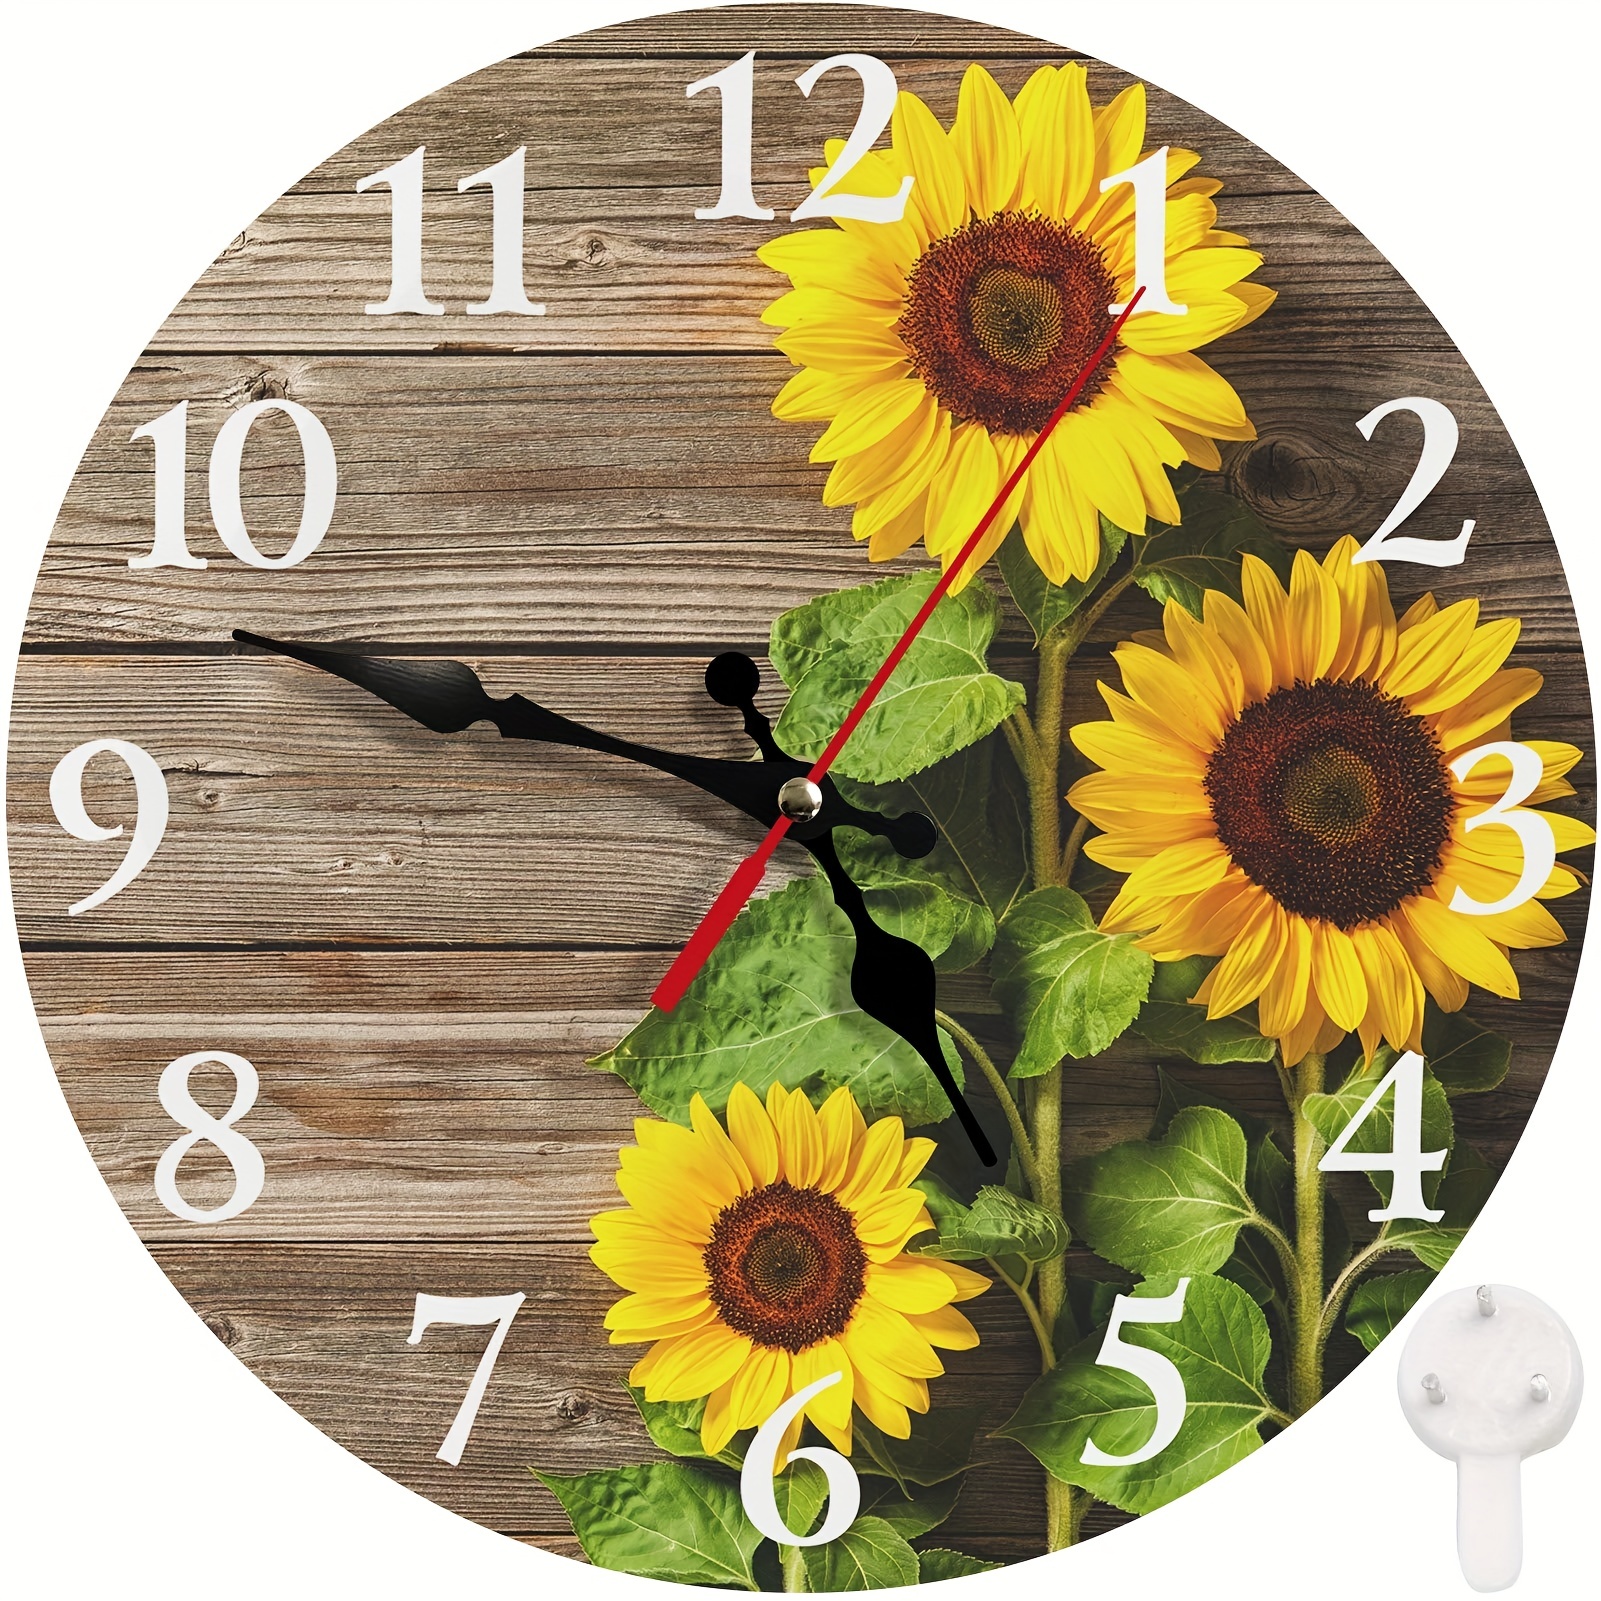 1pc 3D Beautiful Sunflowers Vintage Wood Autumn Round Wall Clock, Battery Operated Quartz Analog Quiet Desk Clock For Home Office School, Fall Home De